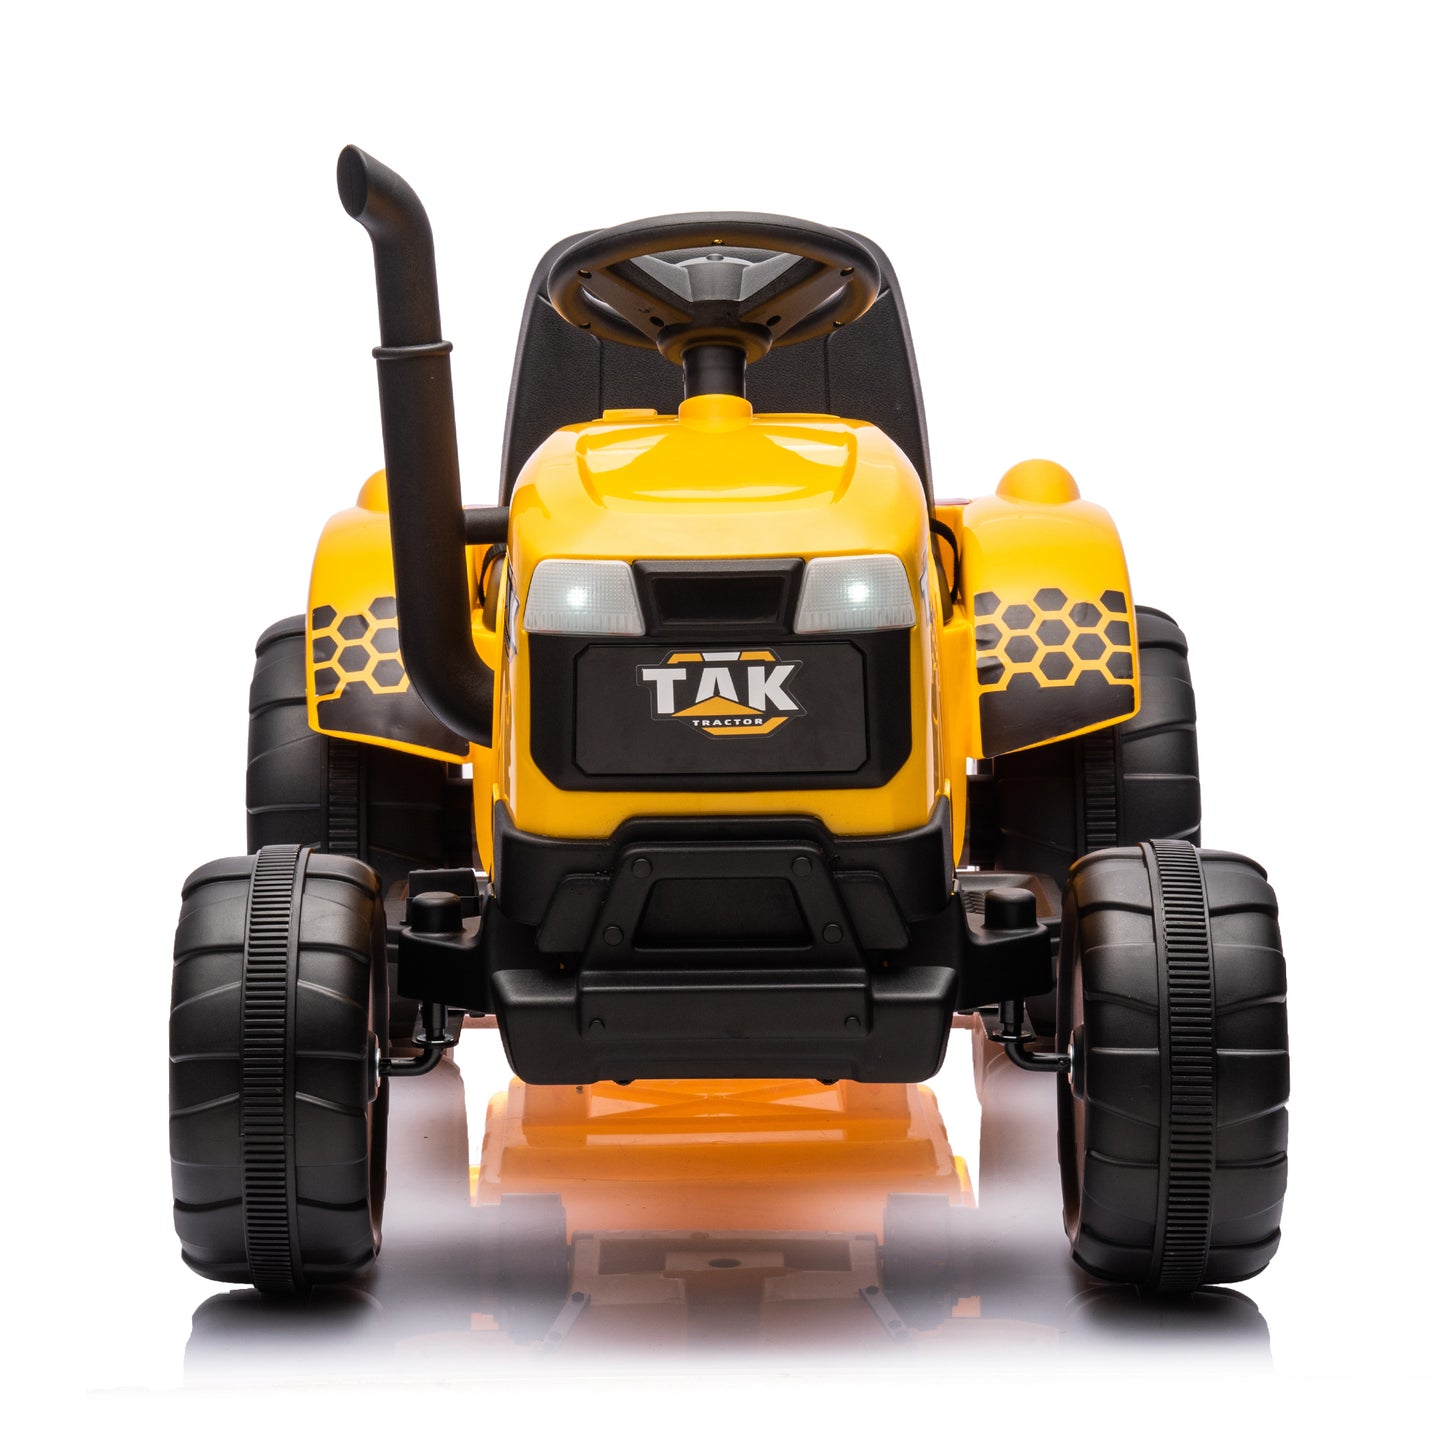 12V Kids Ride on Tractor Electric Excavator Battery Powered Motorized Car for Kids Ages 3-6, with , Detachable Trailer, Remote Control, & Bright Headlight, Yellow